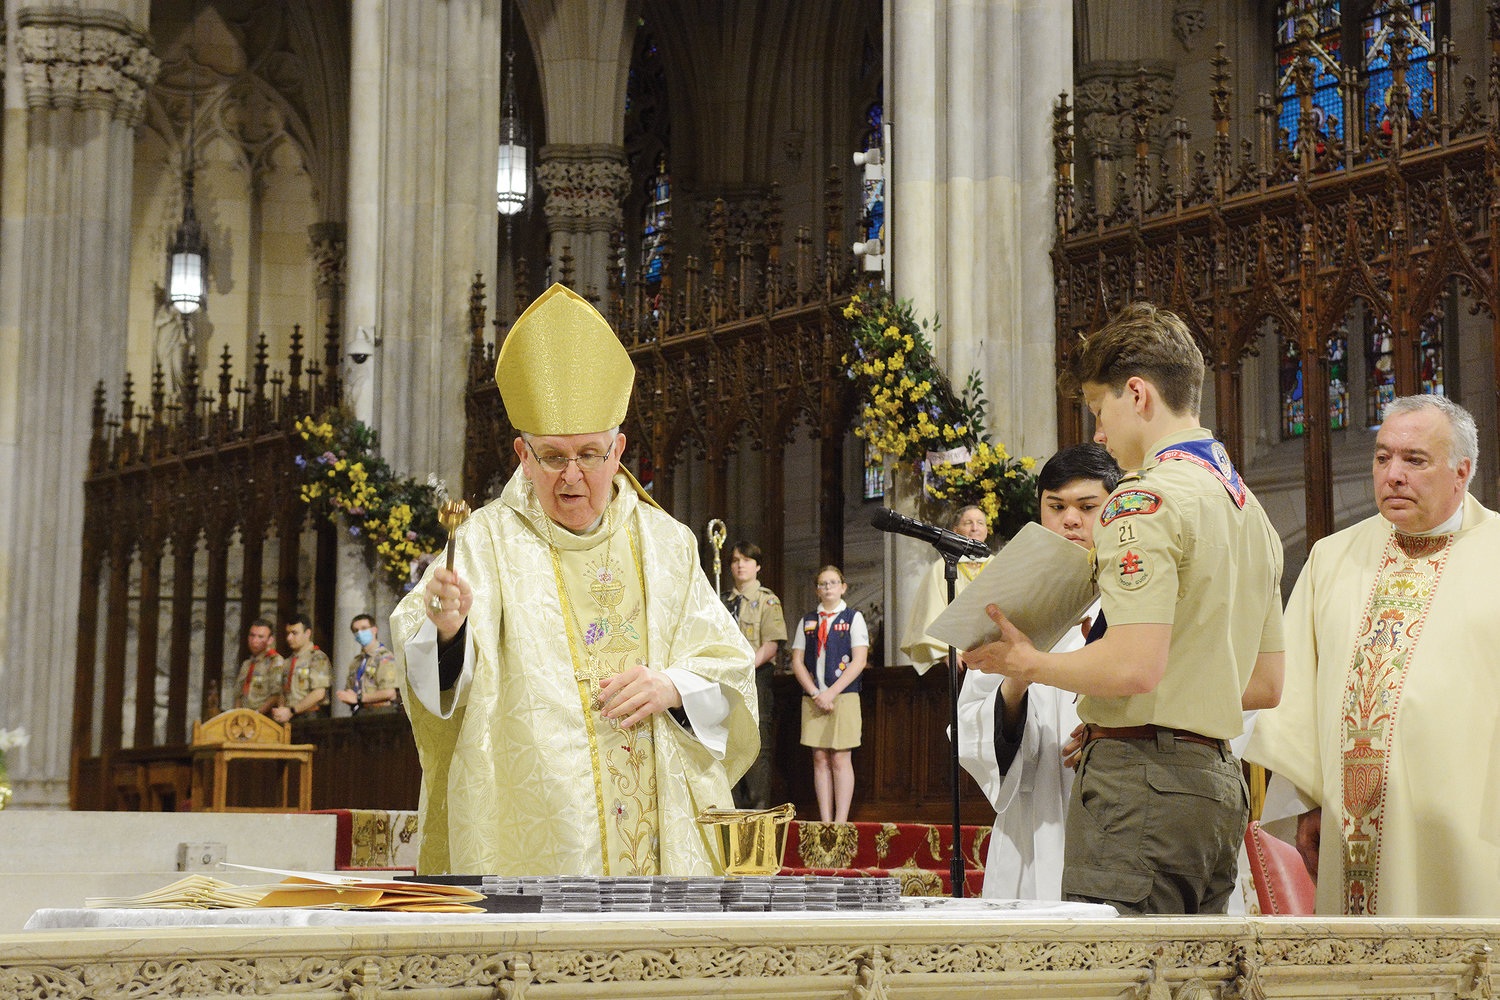 Auxiliary Bishop John O’Hara blesses the medals of faith he presented to Boy Scouts, Girl Scouts and adult leaders during Mass.